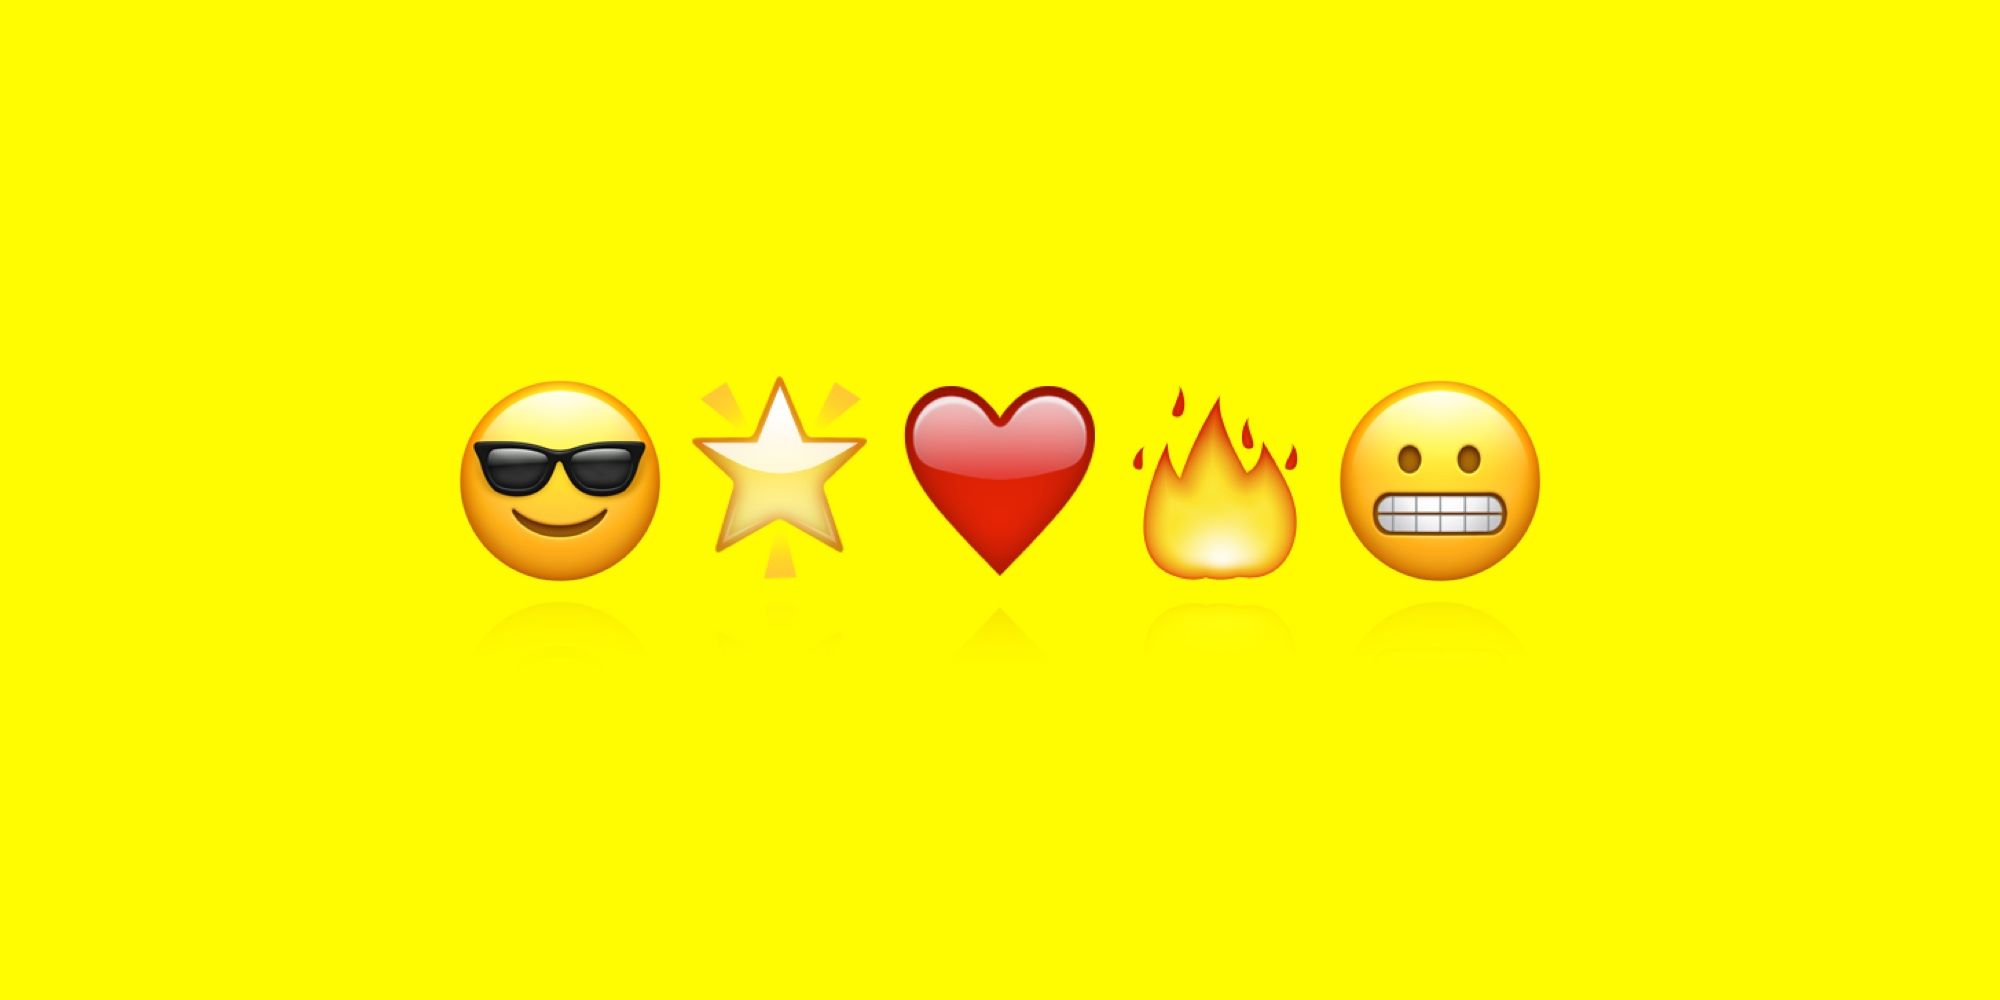 What Do The Snapchat Emojis Mean?